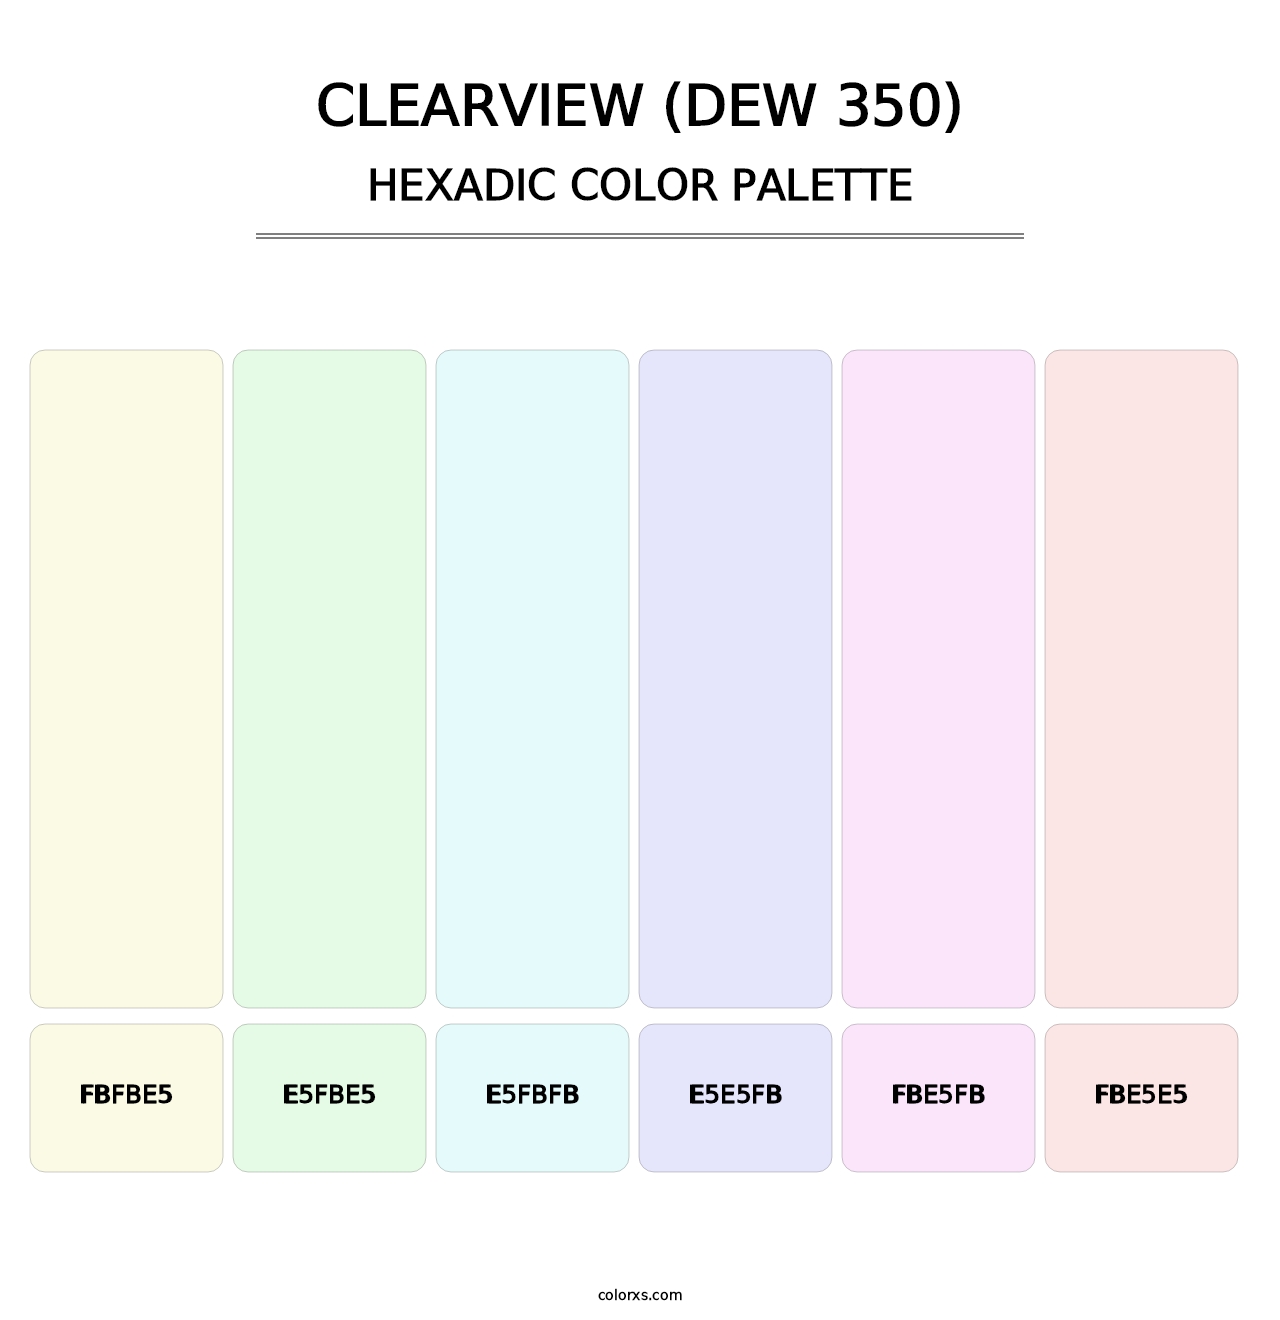 Clearview (DEW 350) - Hexadic Color Palette